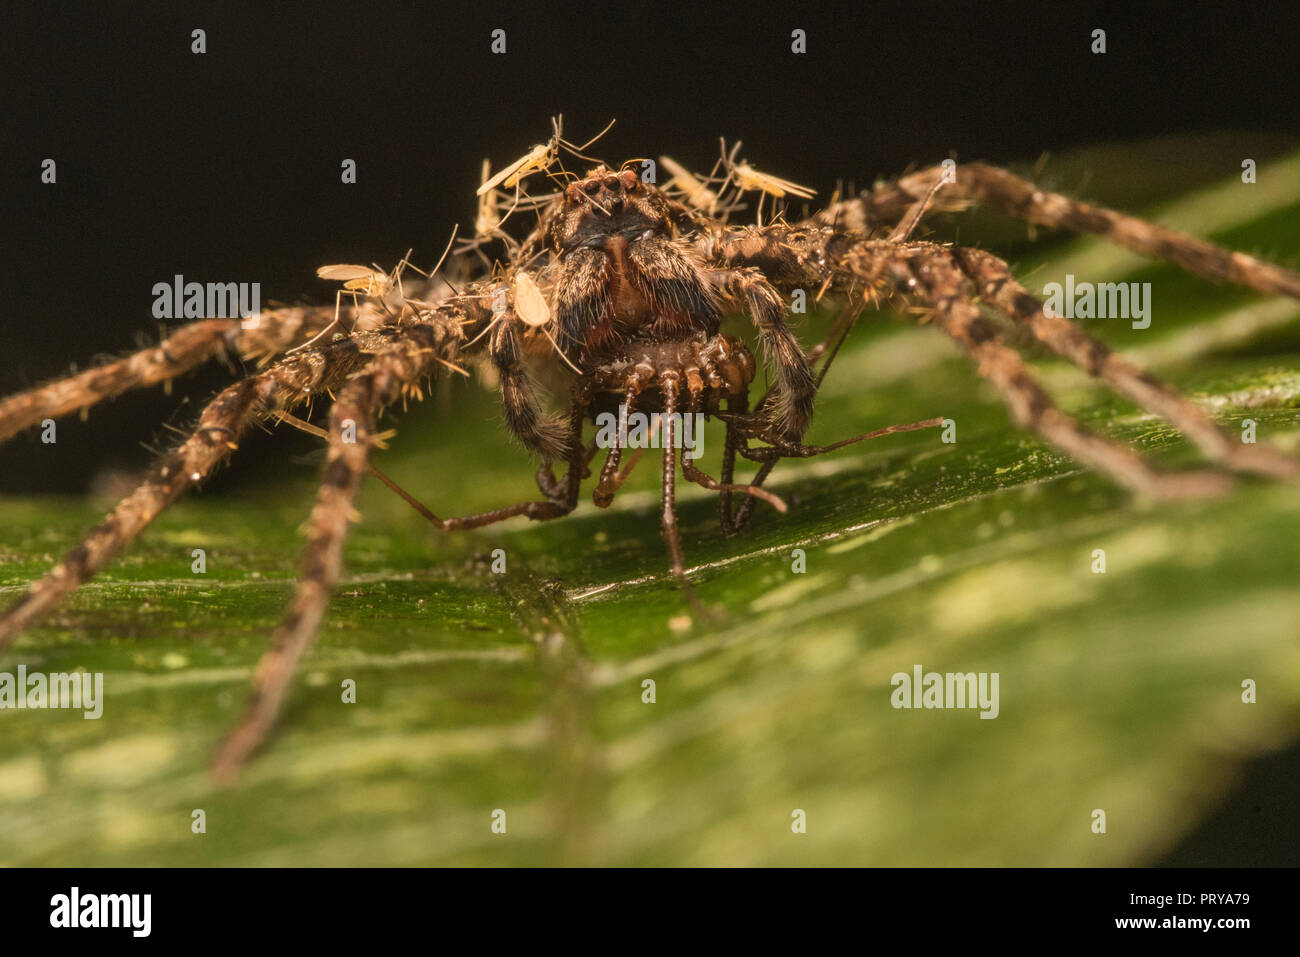 A large huntsman spider with prey, a swarm of gall midges (Cecidomyiidae) are sitting on him likely engaging in kleptoparasitism and stealing food. Stock Photo